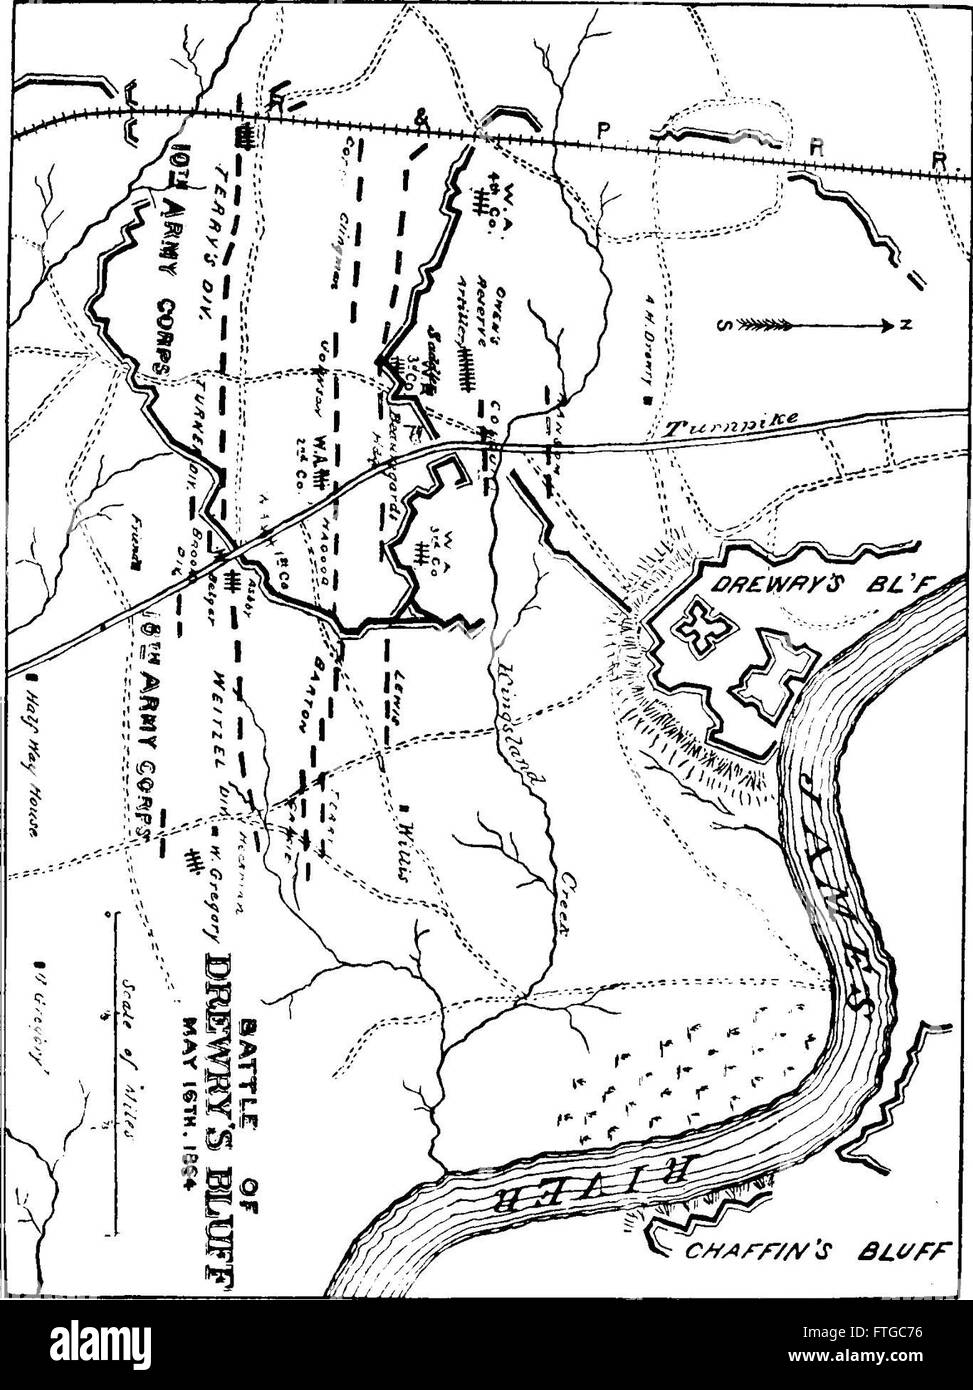 In camp and battle with the Washington artillery of New Orleans (electronic resource)- a narrative of events during the late civil war from Bull Run to Appomattox and Spanish Fort - compiled by the Stock Photo